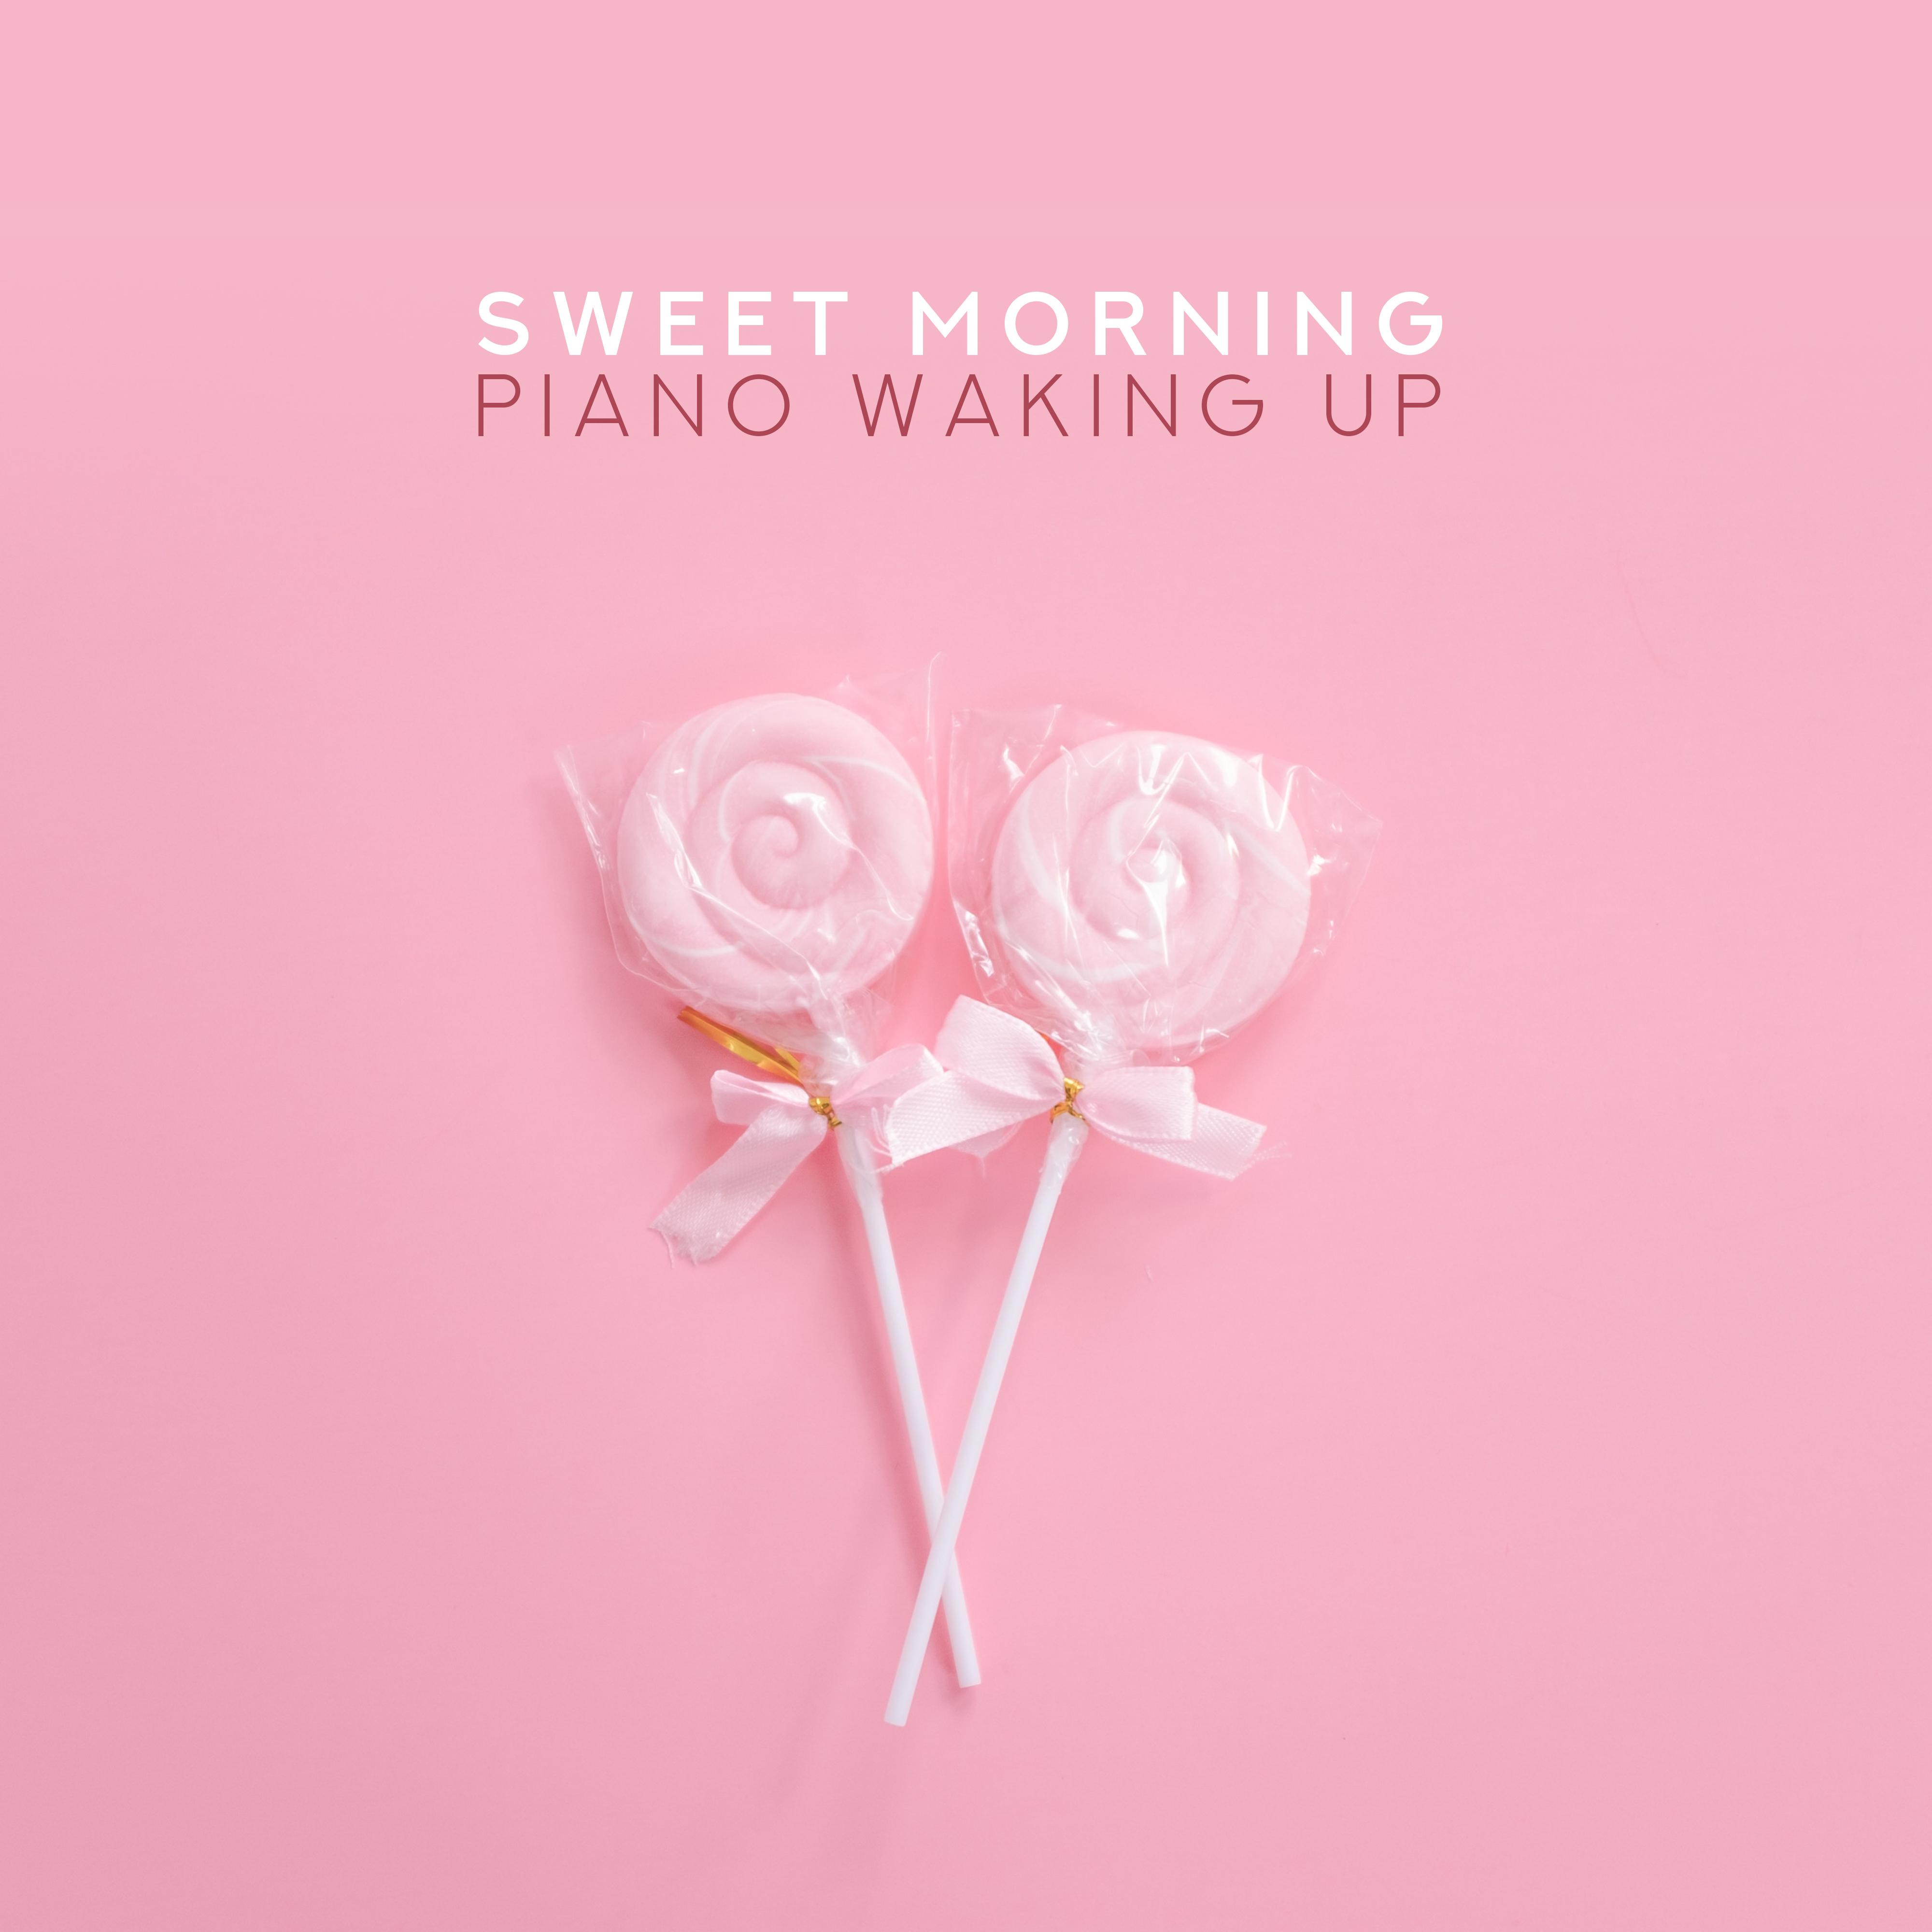 Sweet Morning Piano Waking Up: 2019 Piano Soft Jazz Music for Perfect Start a Day, Calm Morning Moments, Breakfast & Coffee Background Melodies